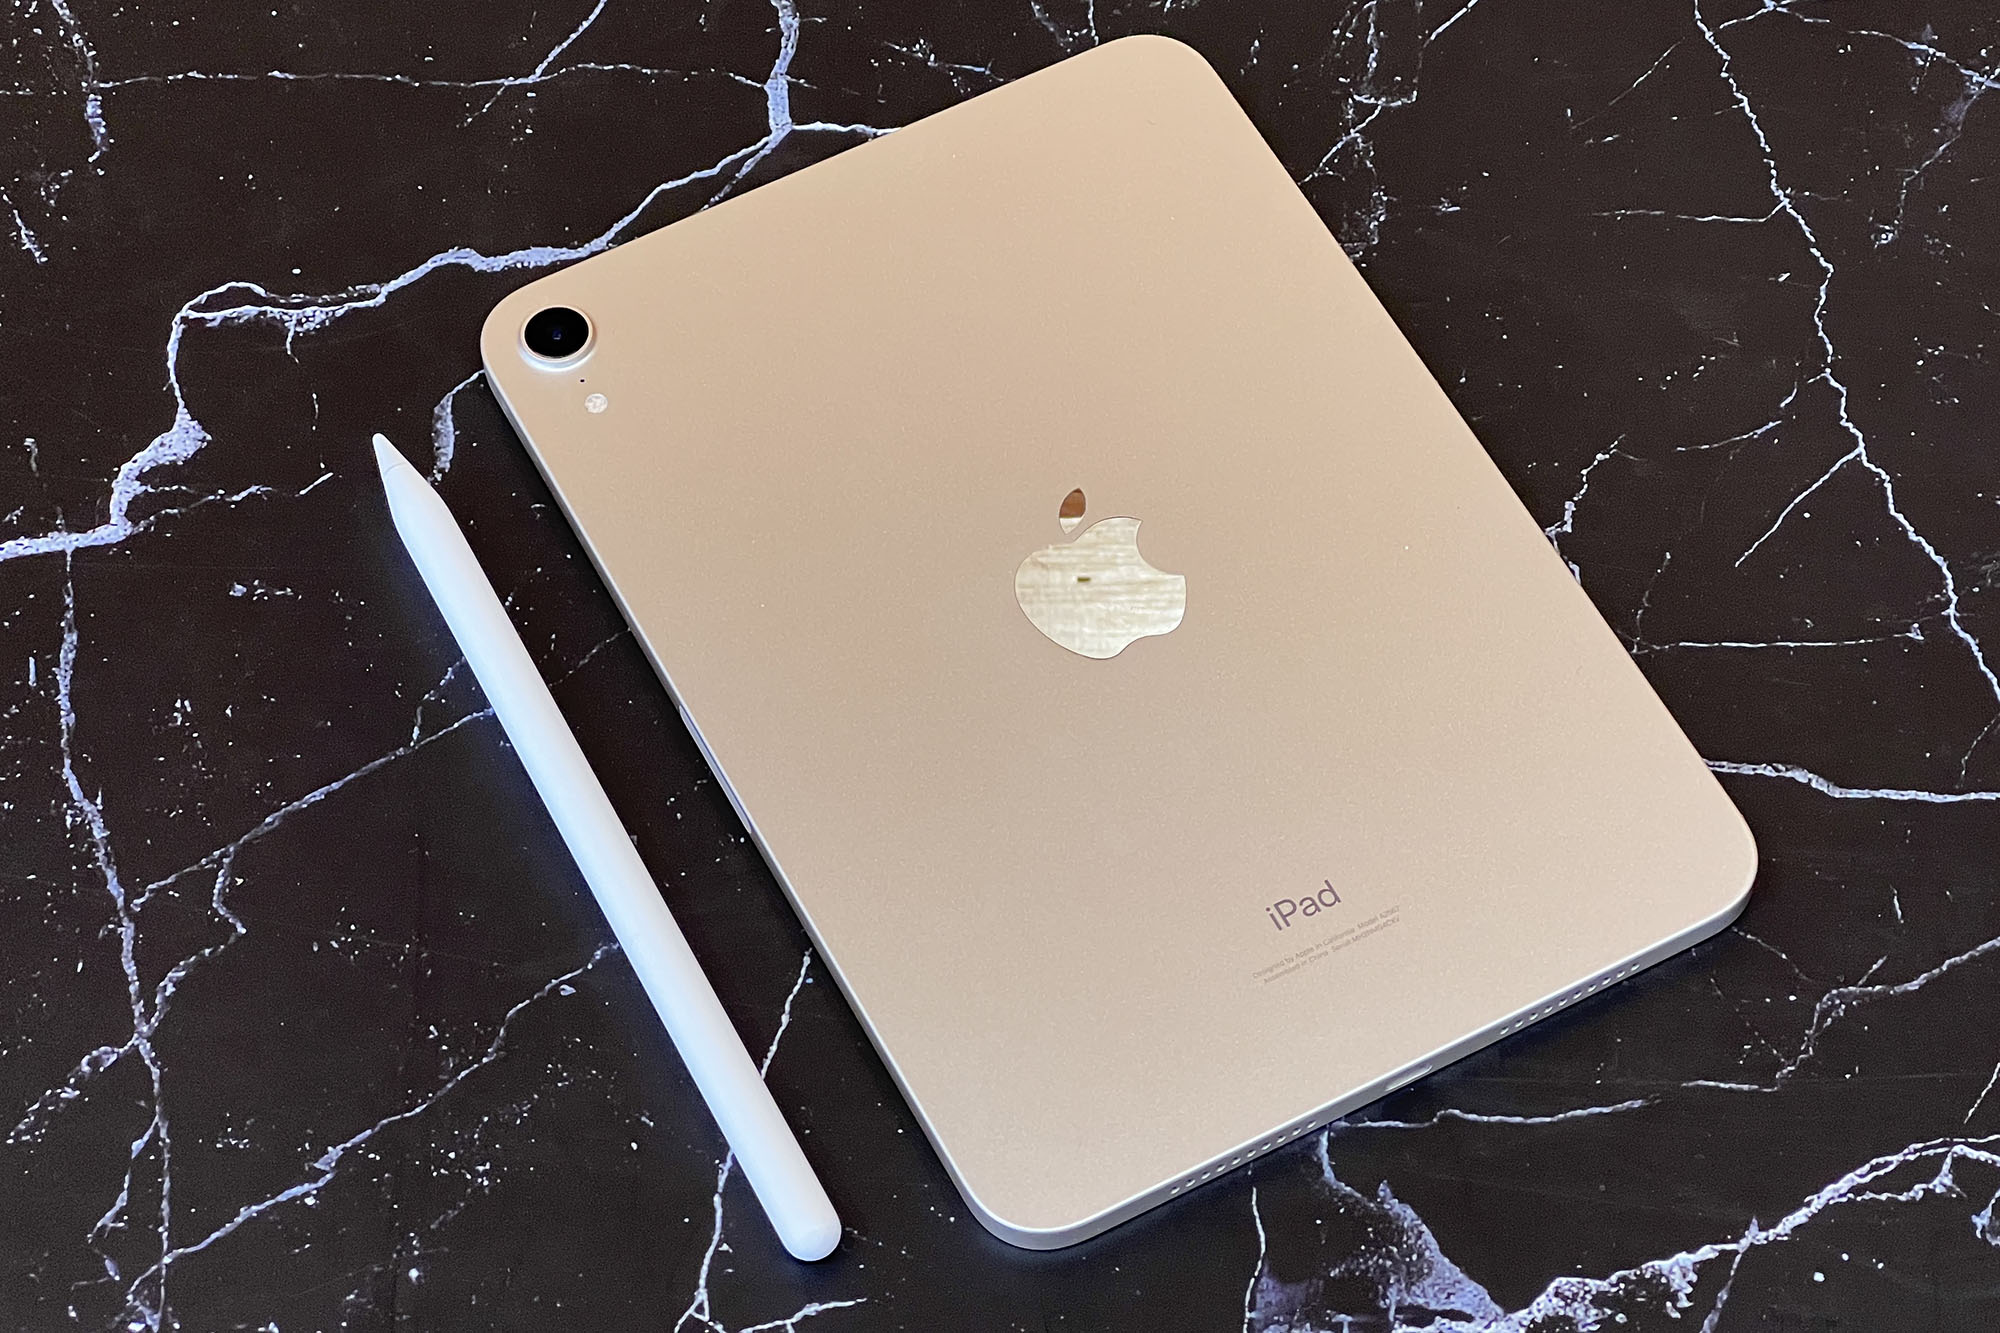 We got an early look at the new iPads, dropping tomorrow, October